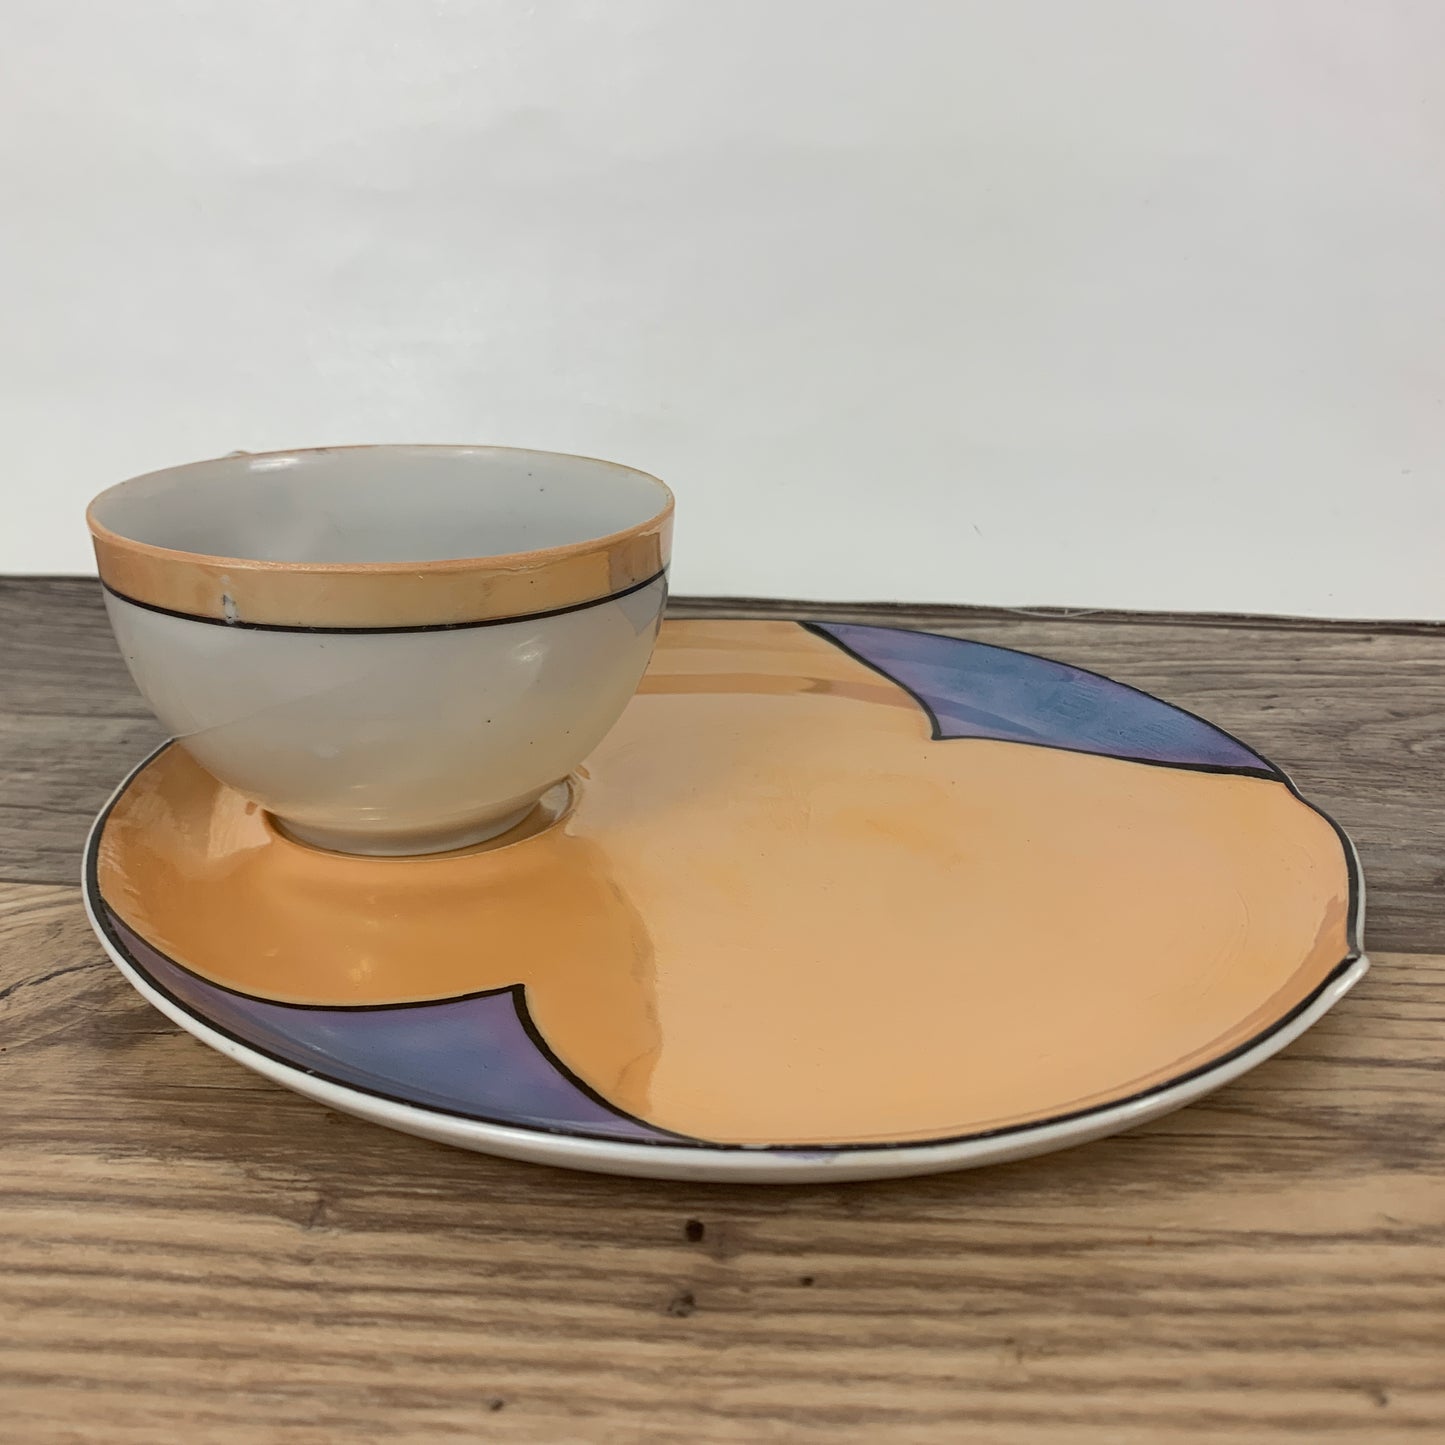 Vintage Japan Luster Ware Tea Cup and Snack Plate